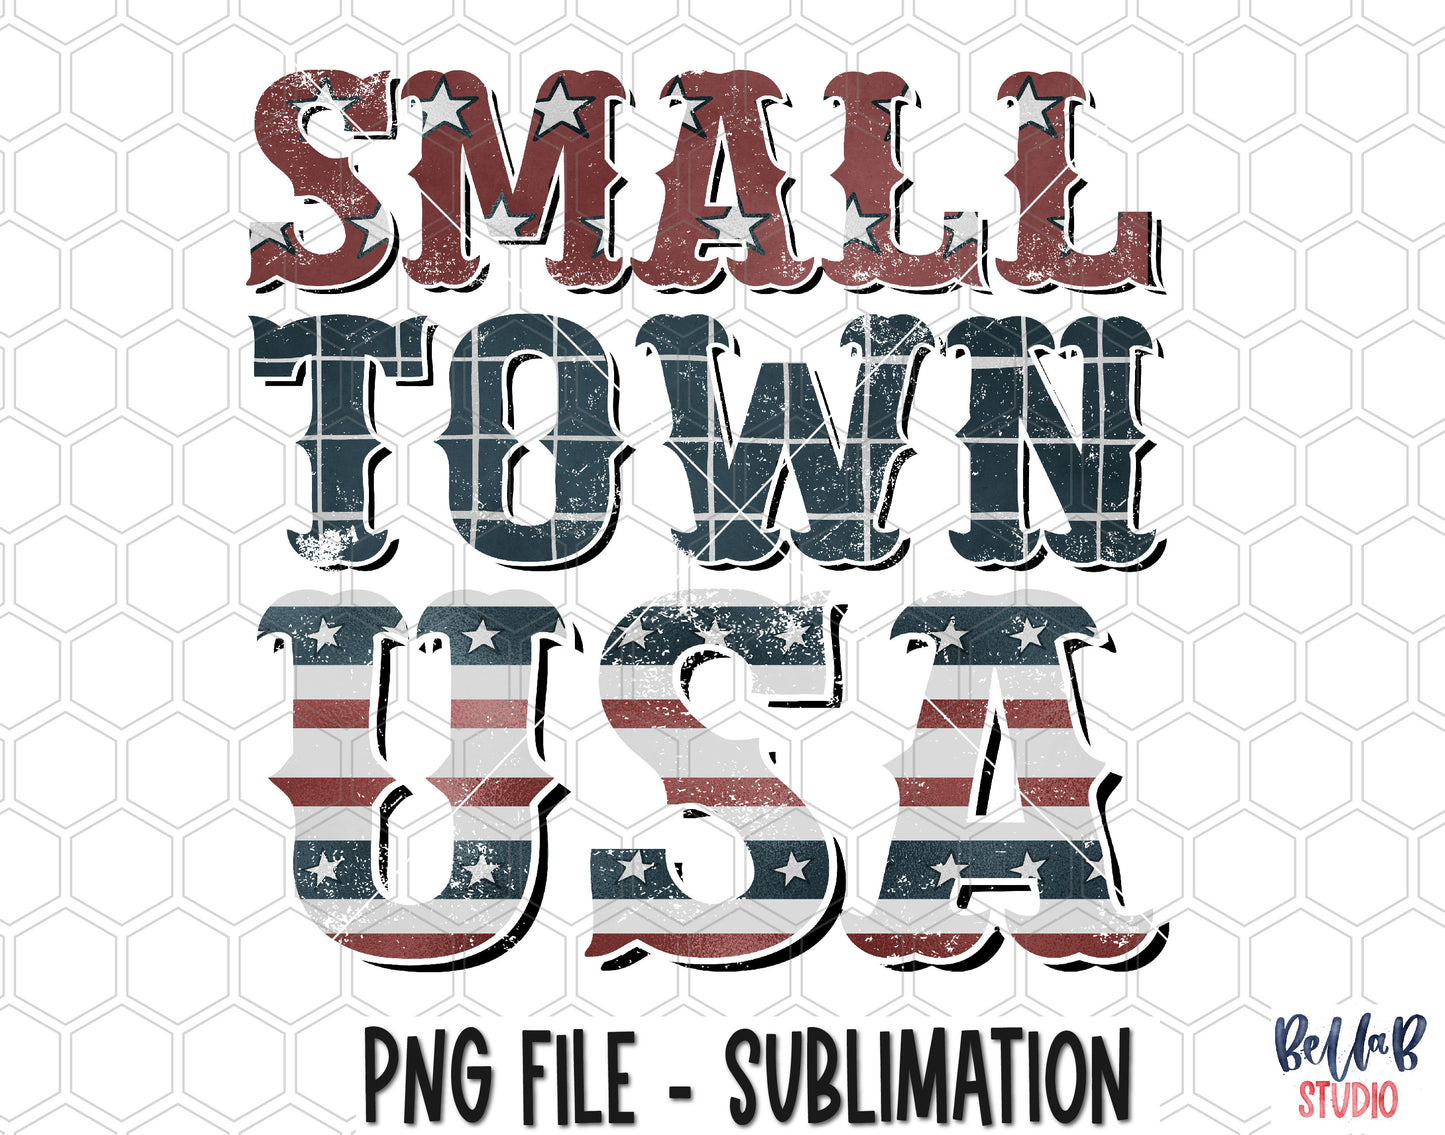 Small Town USA Sublimation Design